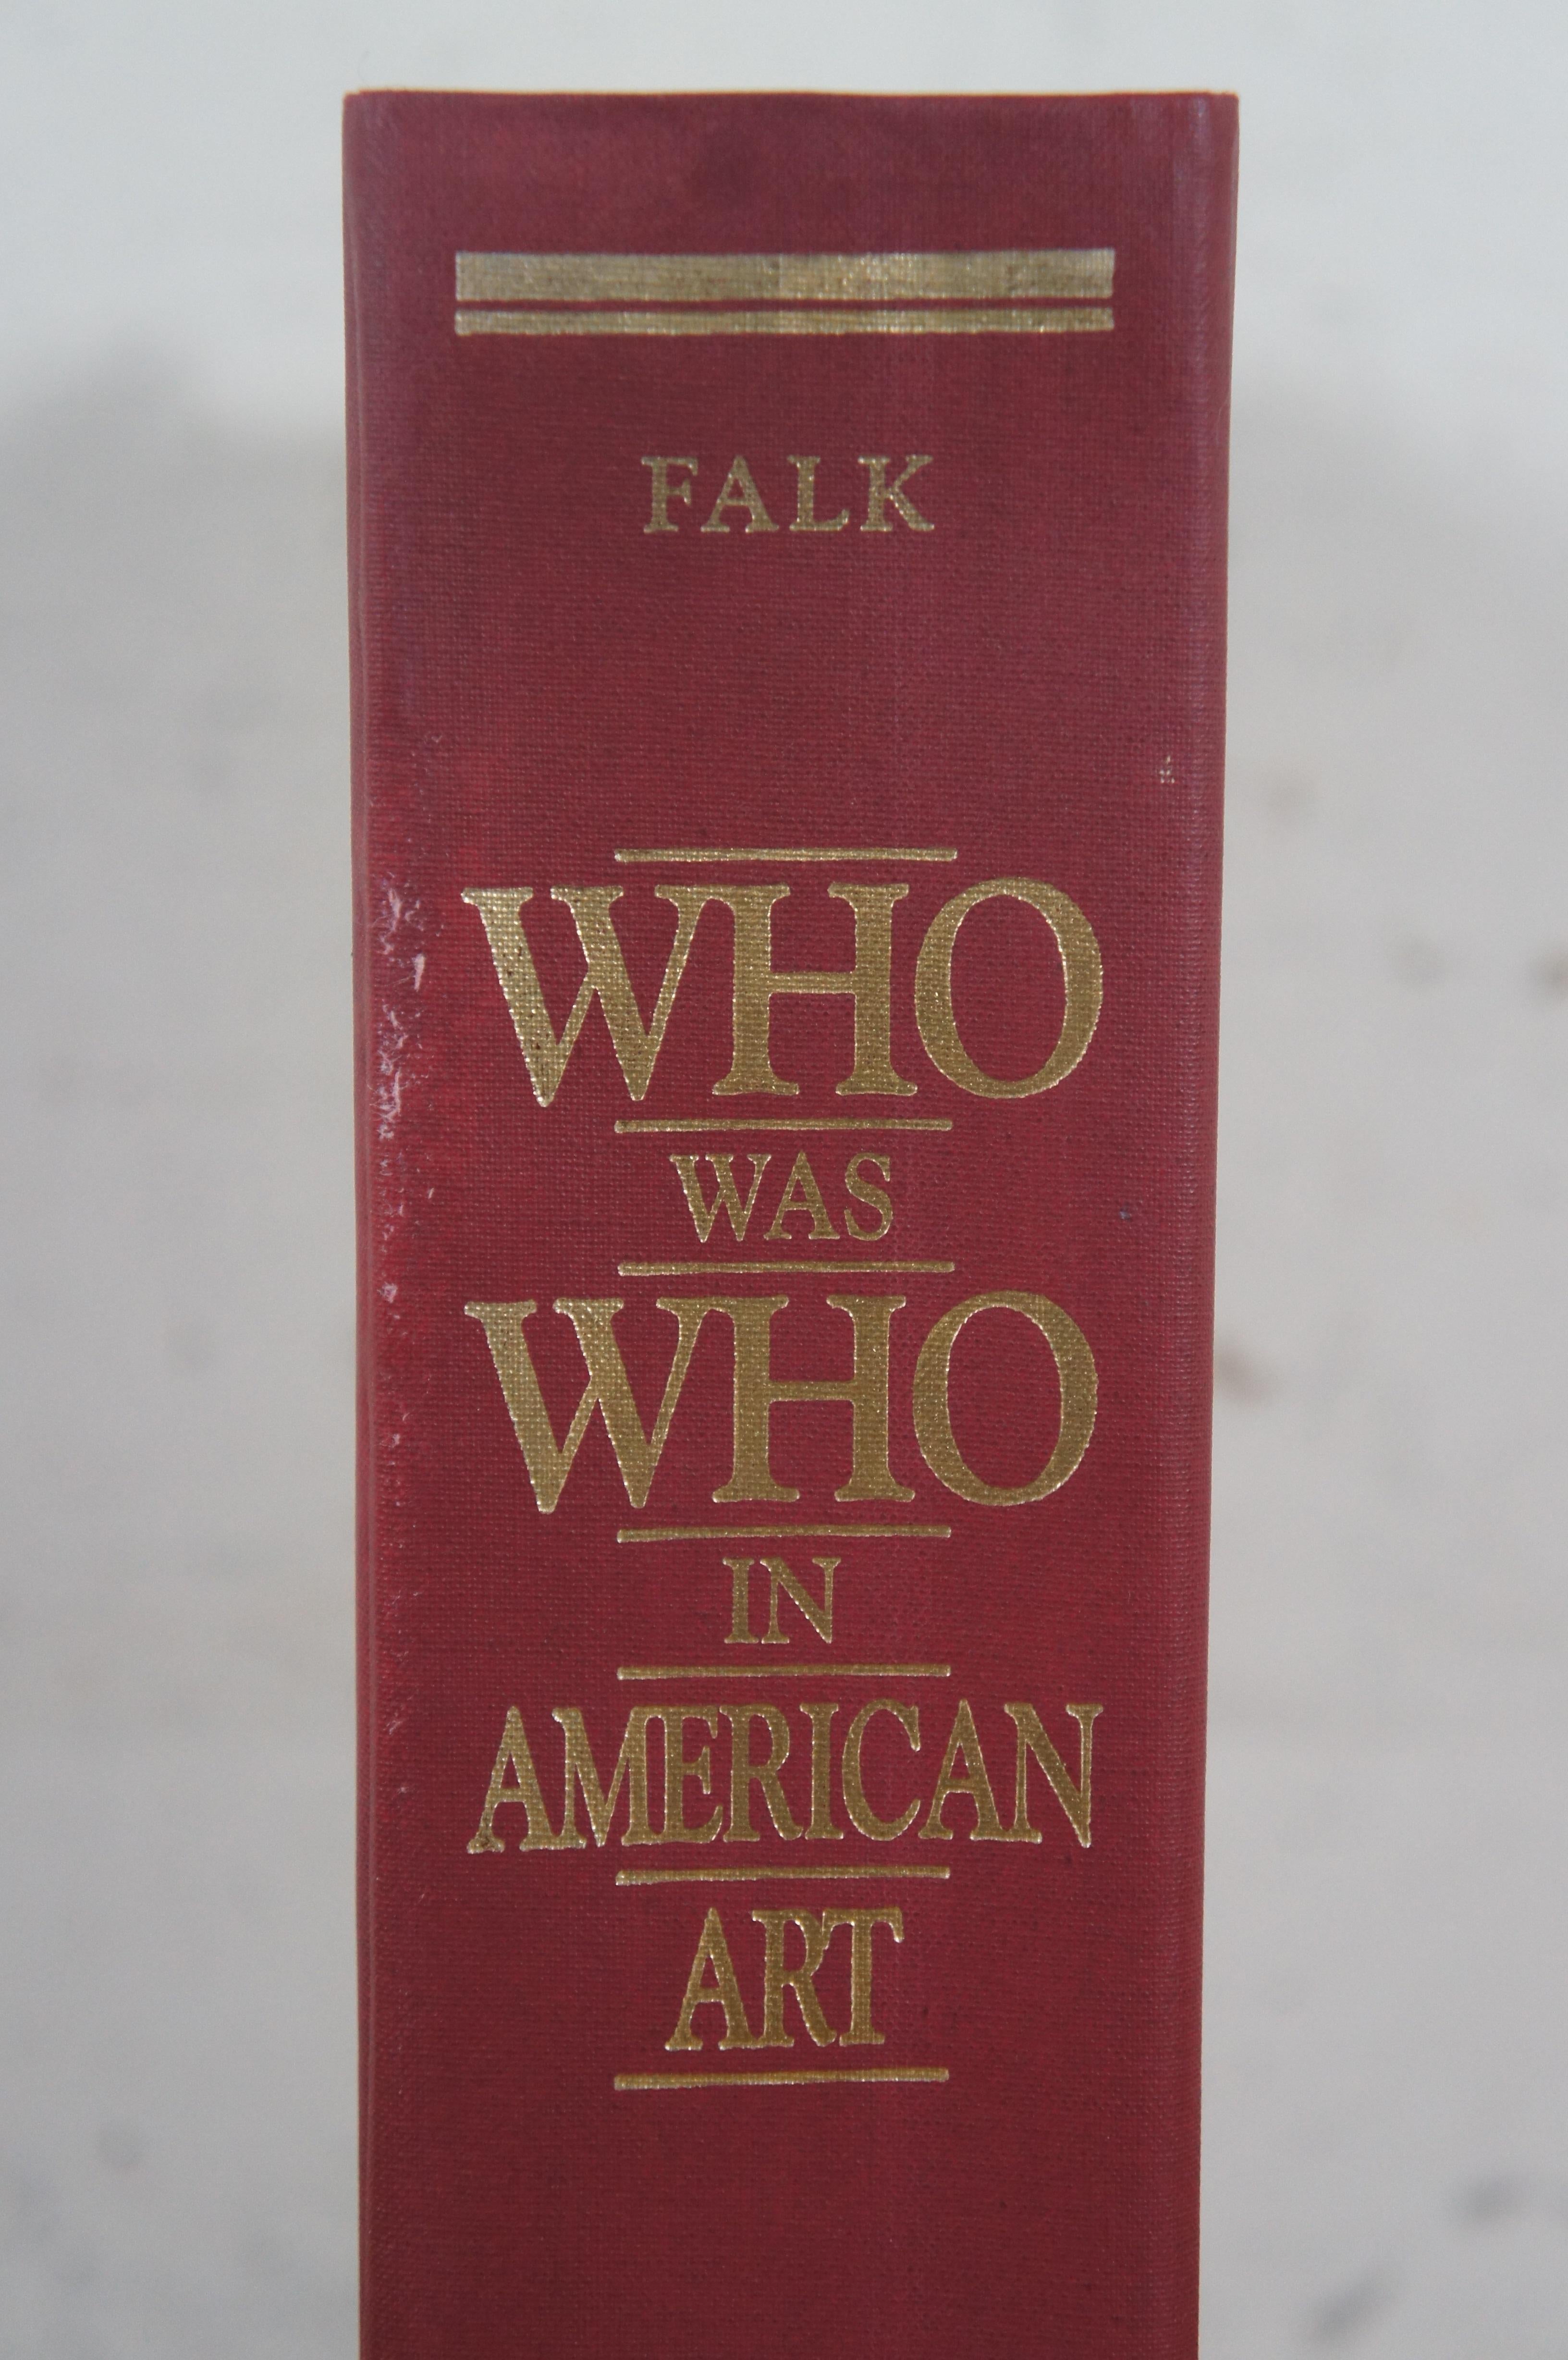 Paper Who Was Who in American Art Hardback Book Falk 1985 